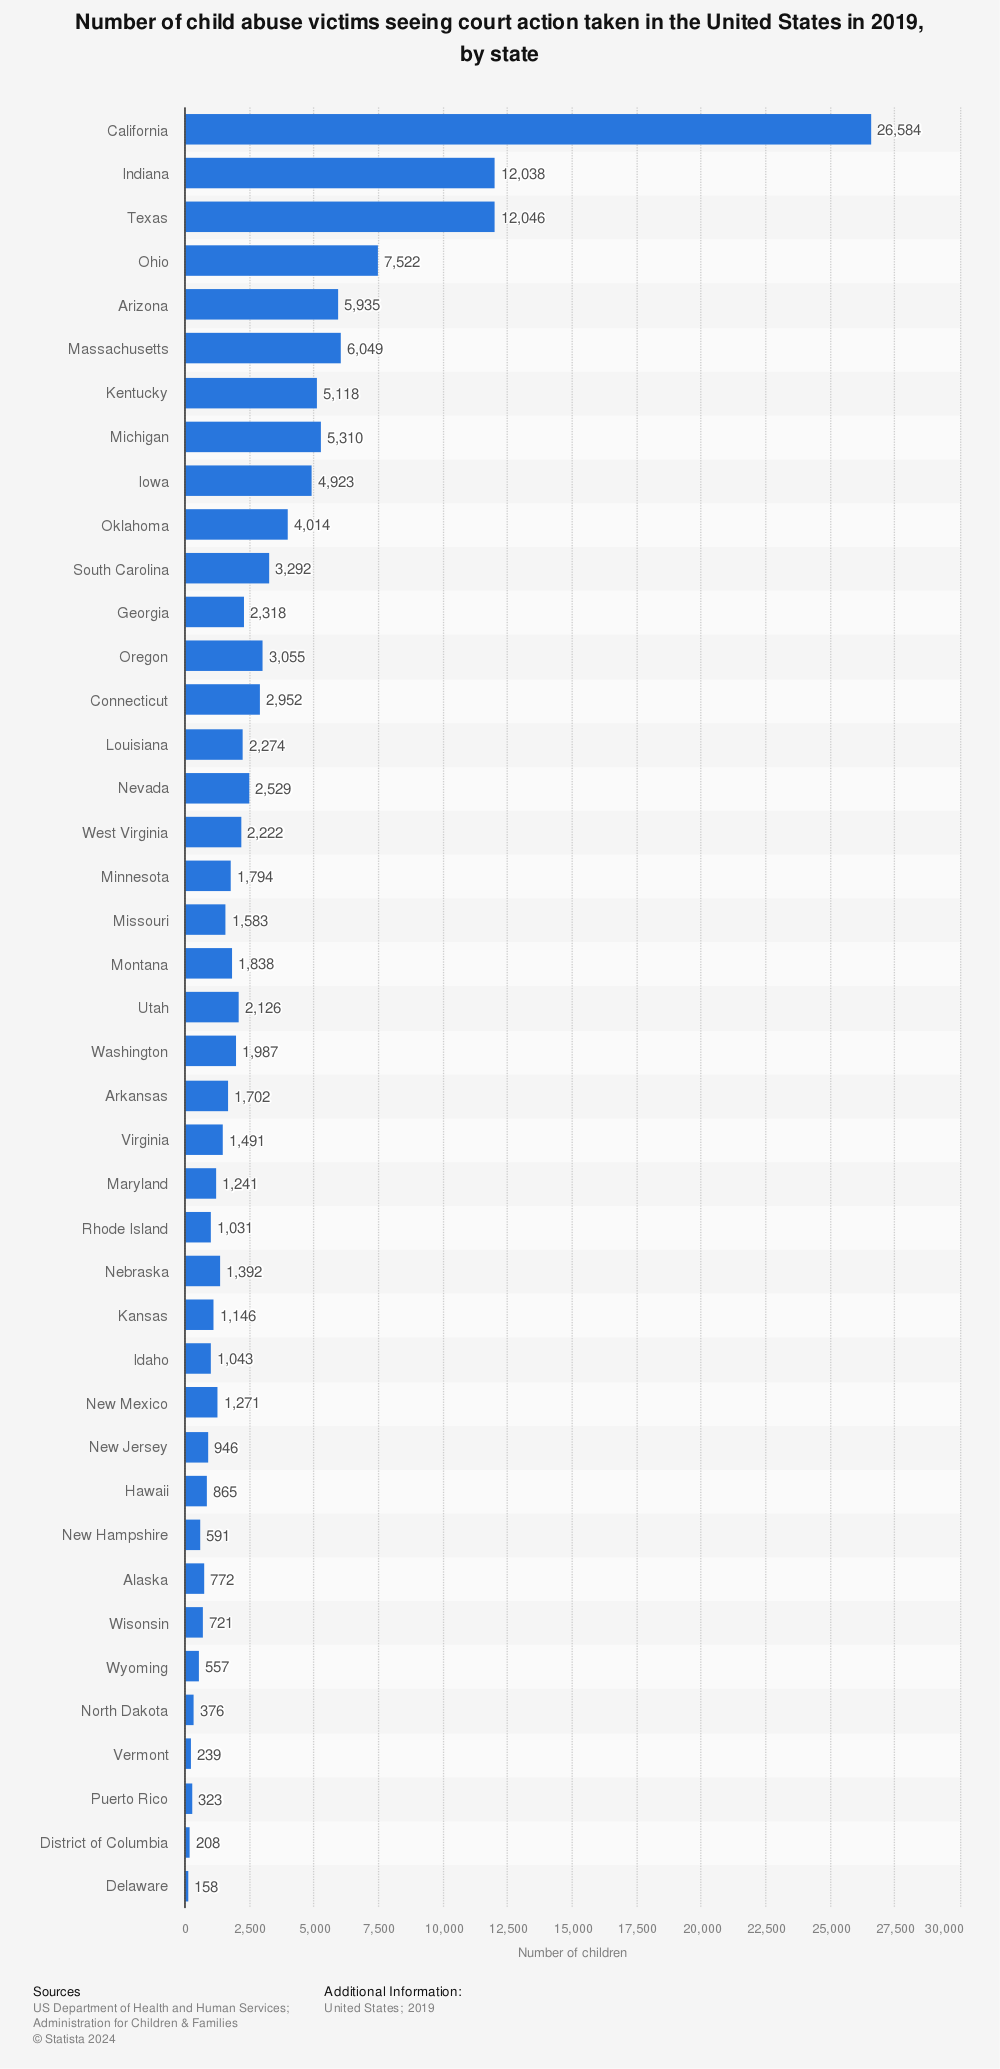 Statistic: Number of child abuse victims seeing court action taken in the United States in 2019, by state | Statista